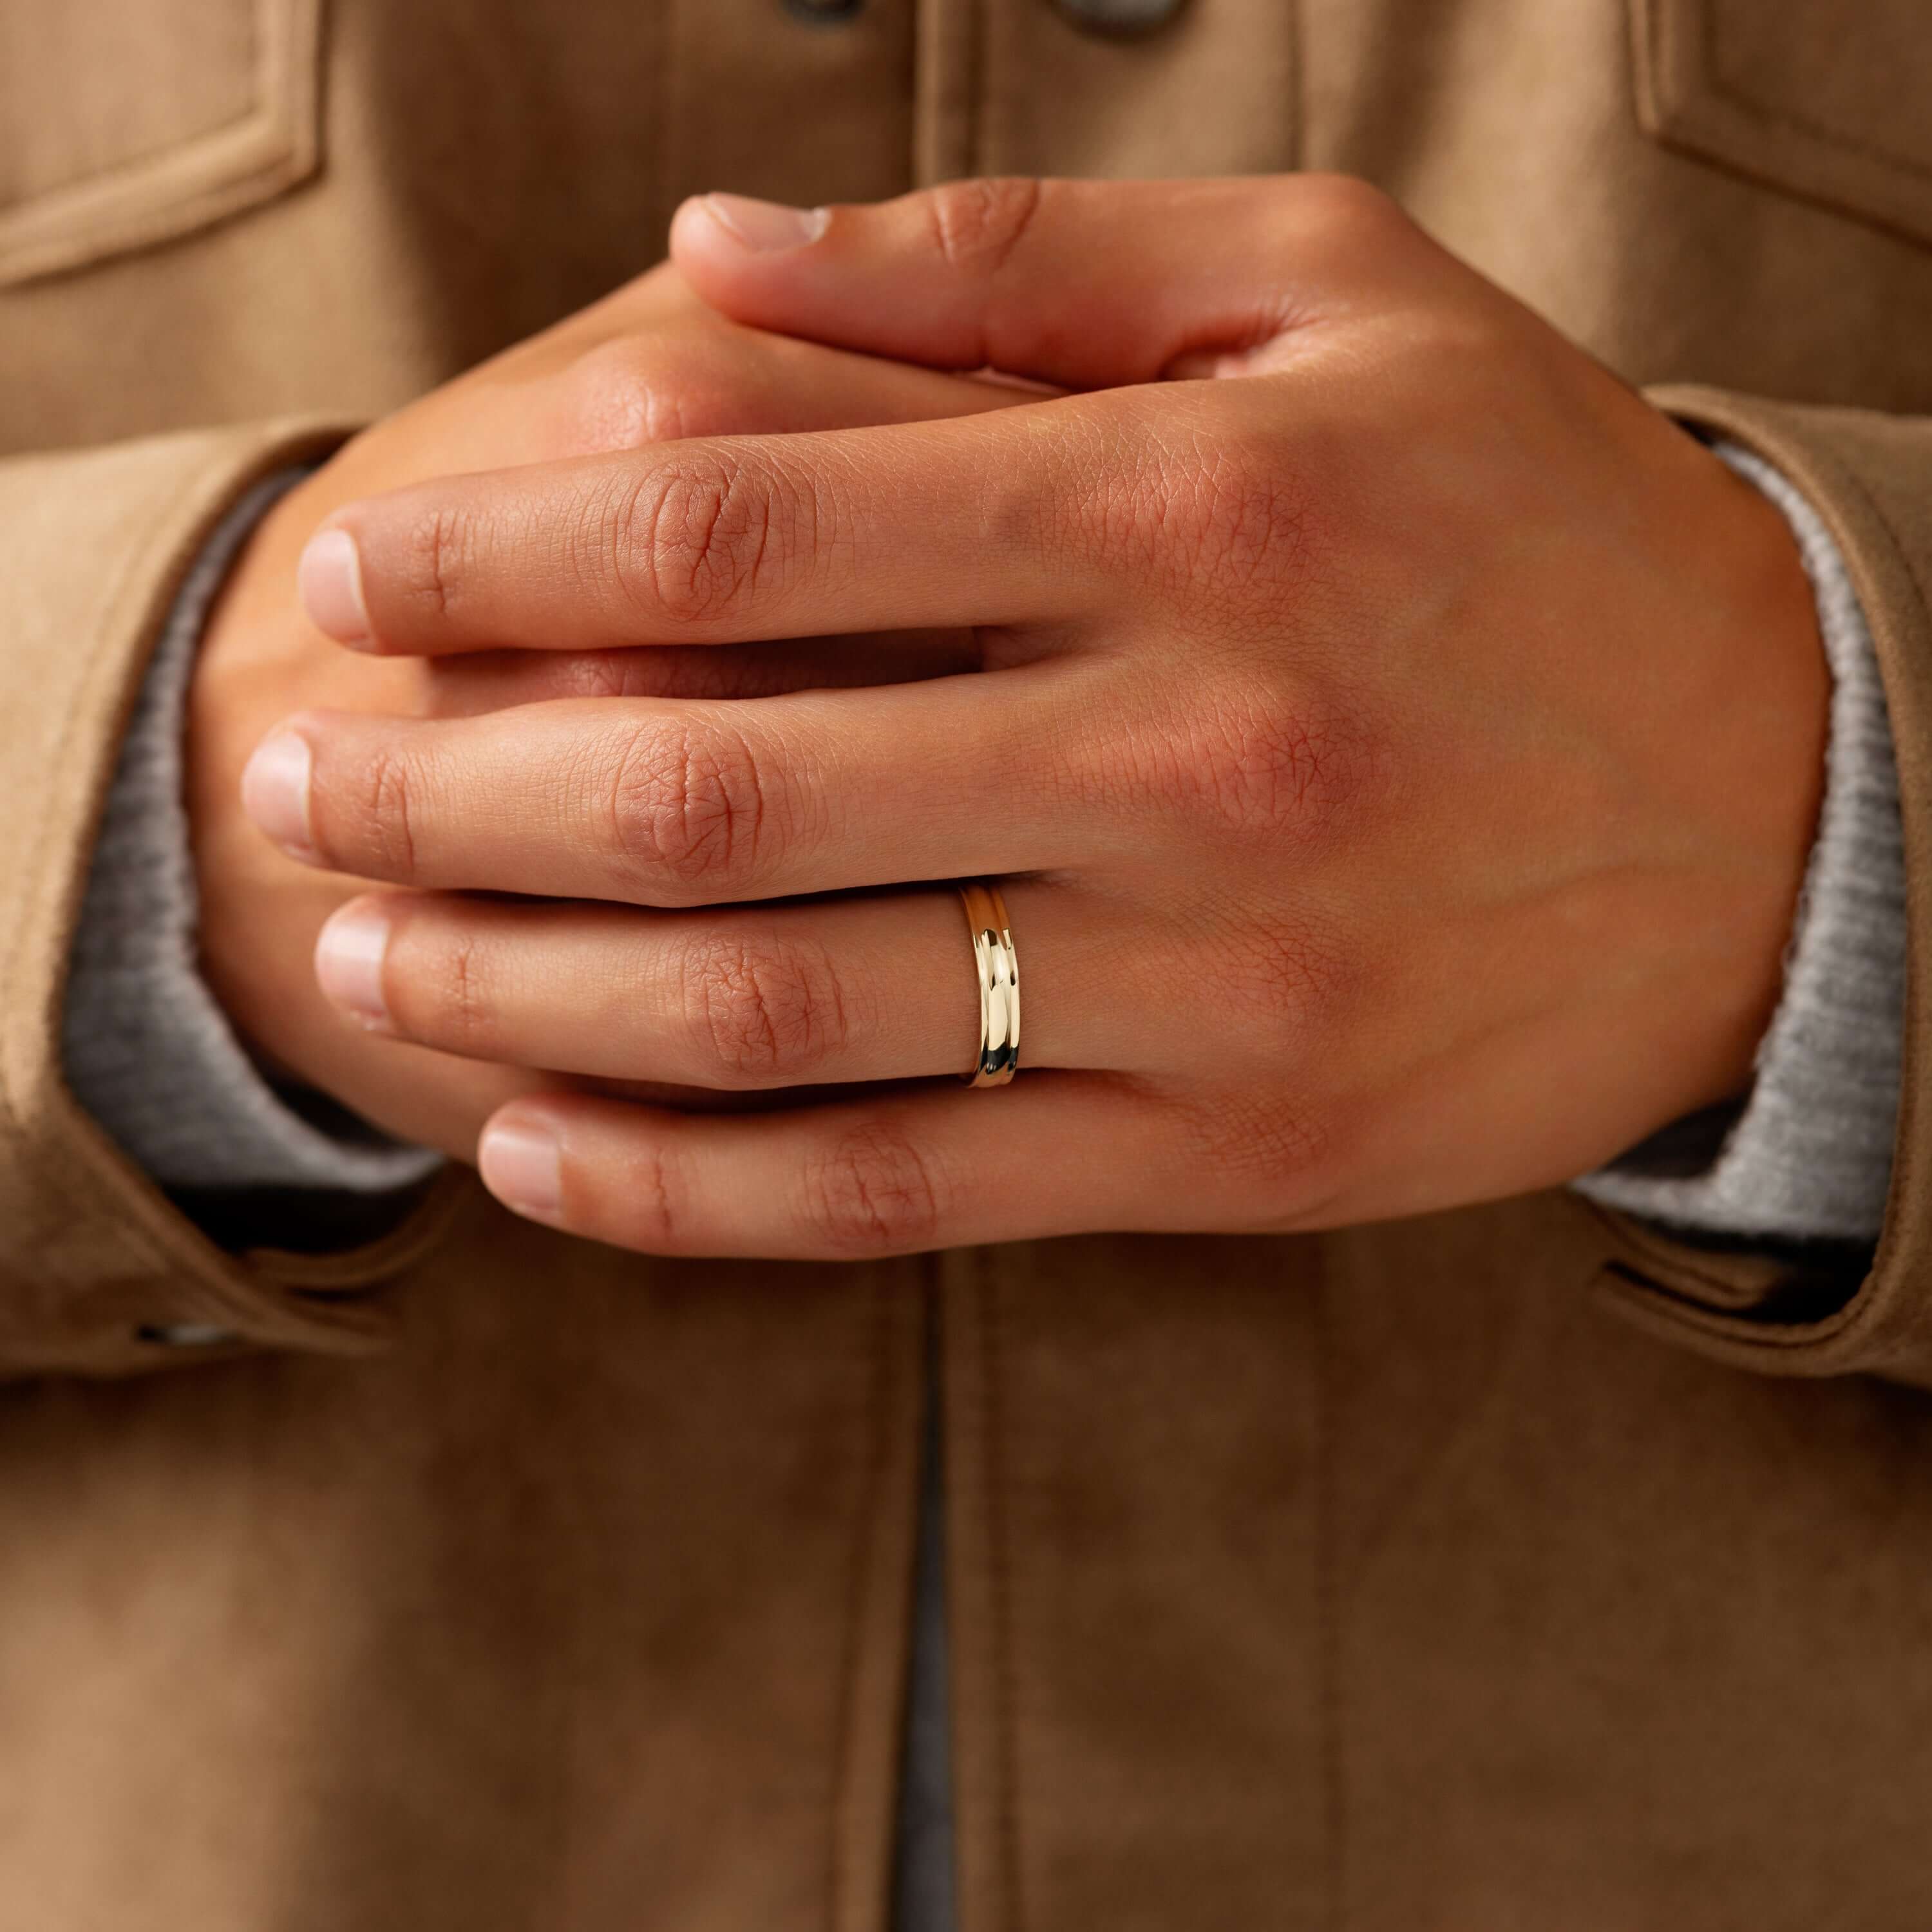 For Him: Men's Engagement Rings and Gifts